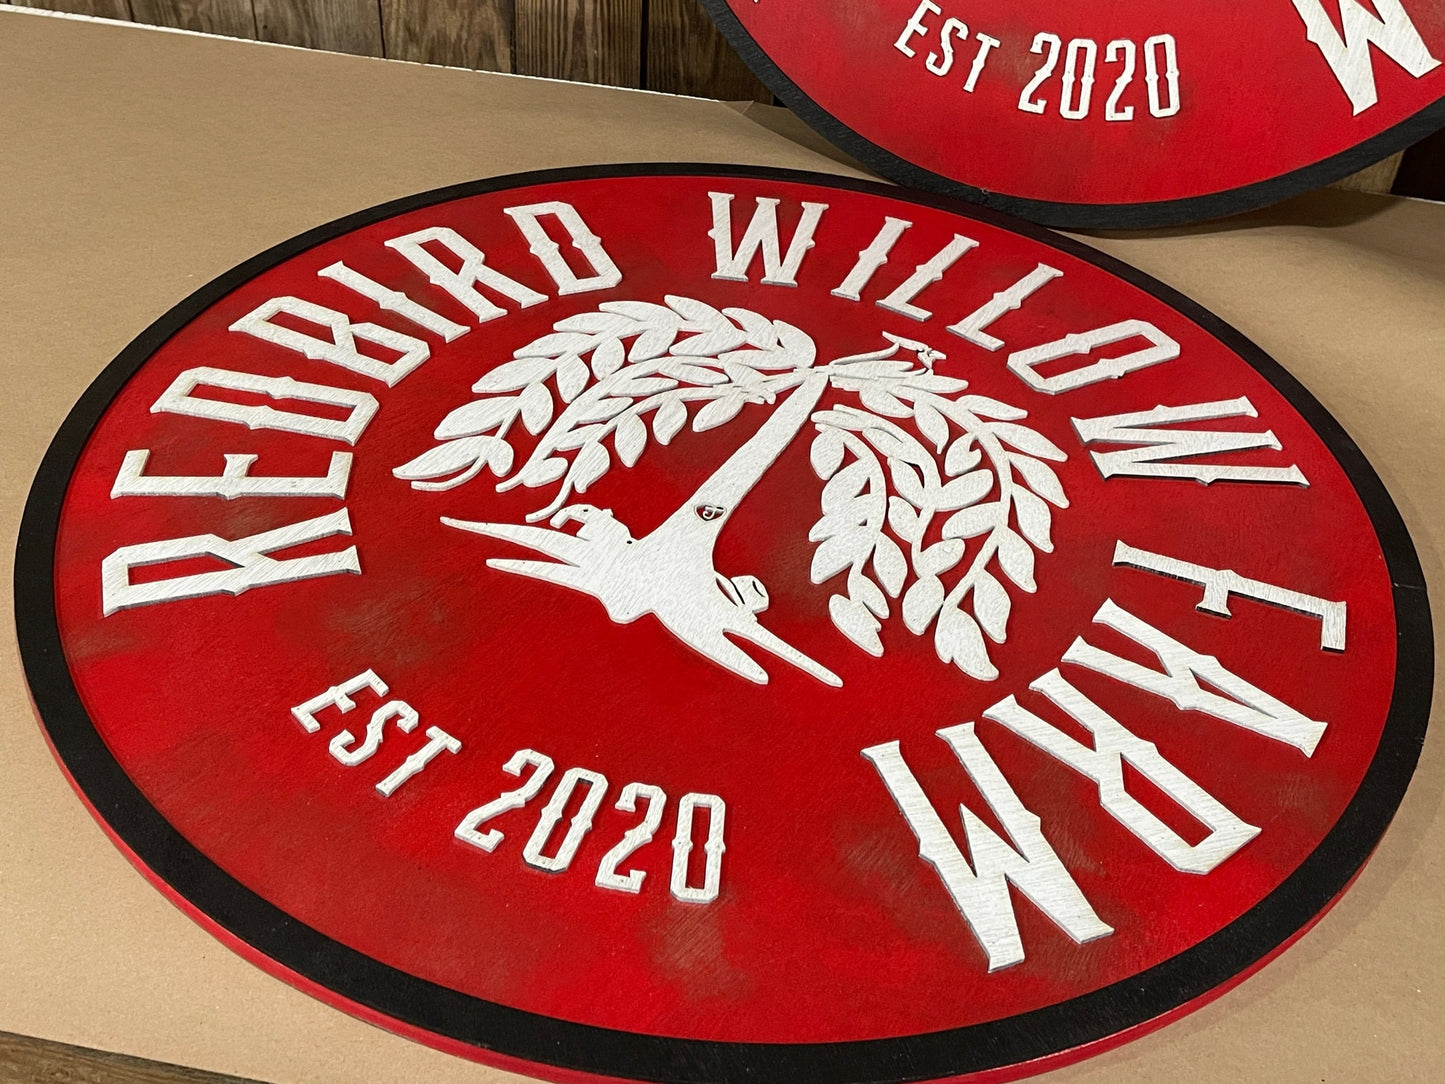 lot of 2 Extra Large Round Custom Signs Redbird Willow Tree Farm 3D Commerical Signage Signs Matching Business Logo Free Ship Made To Order